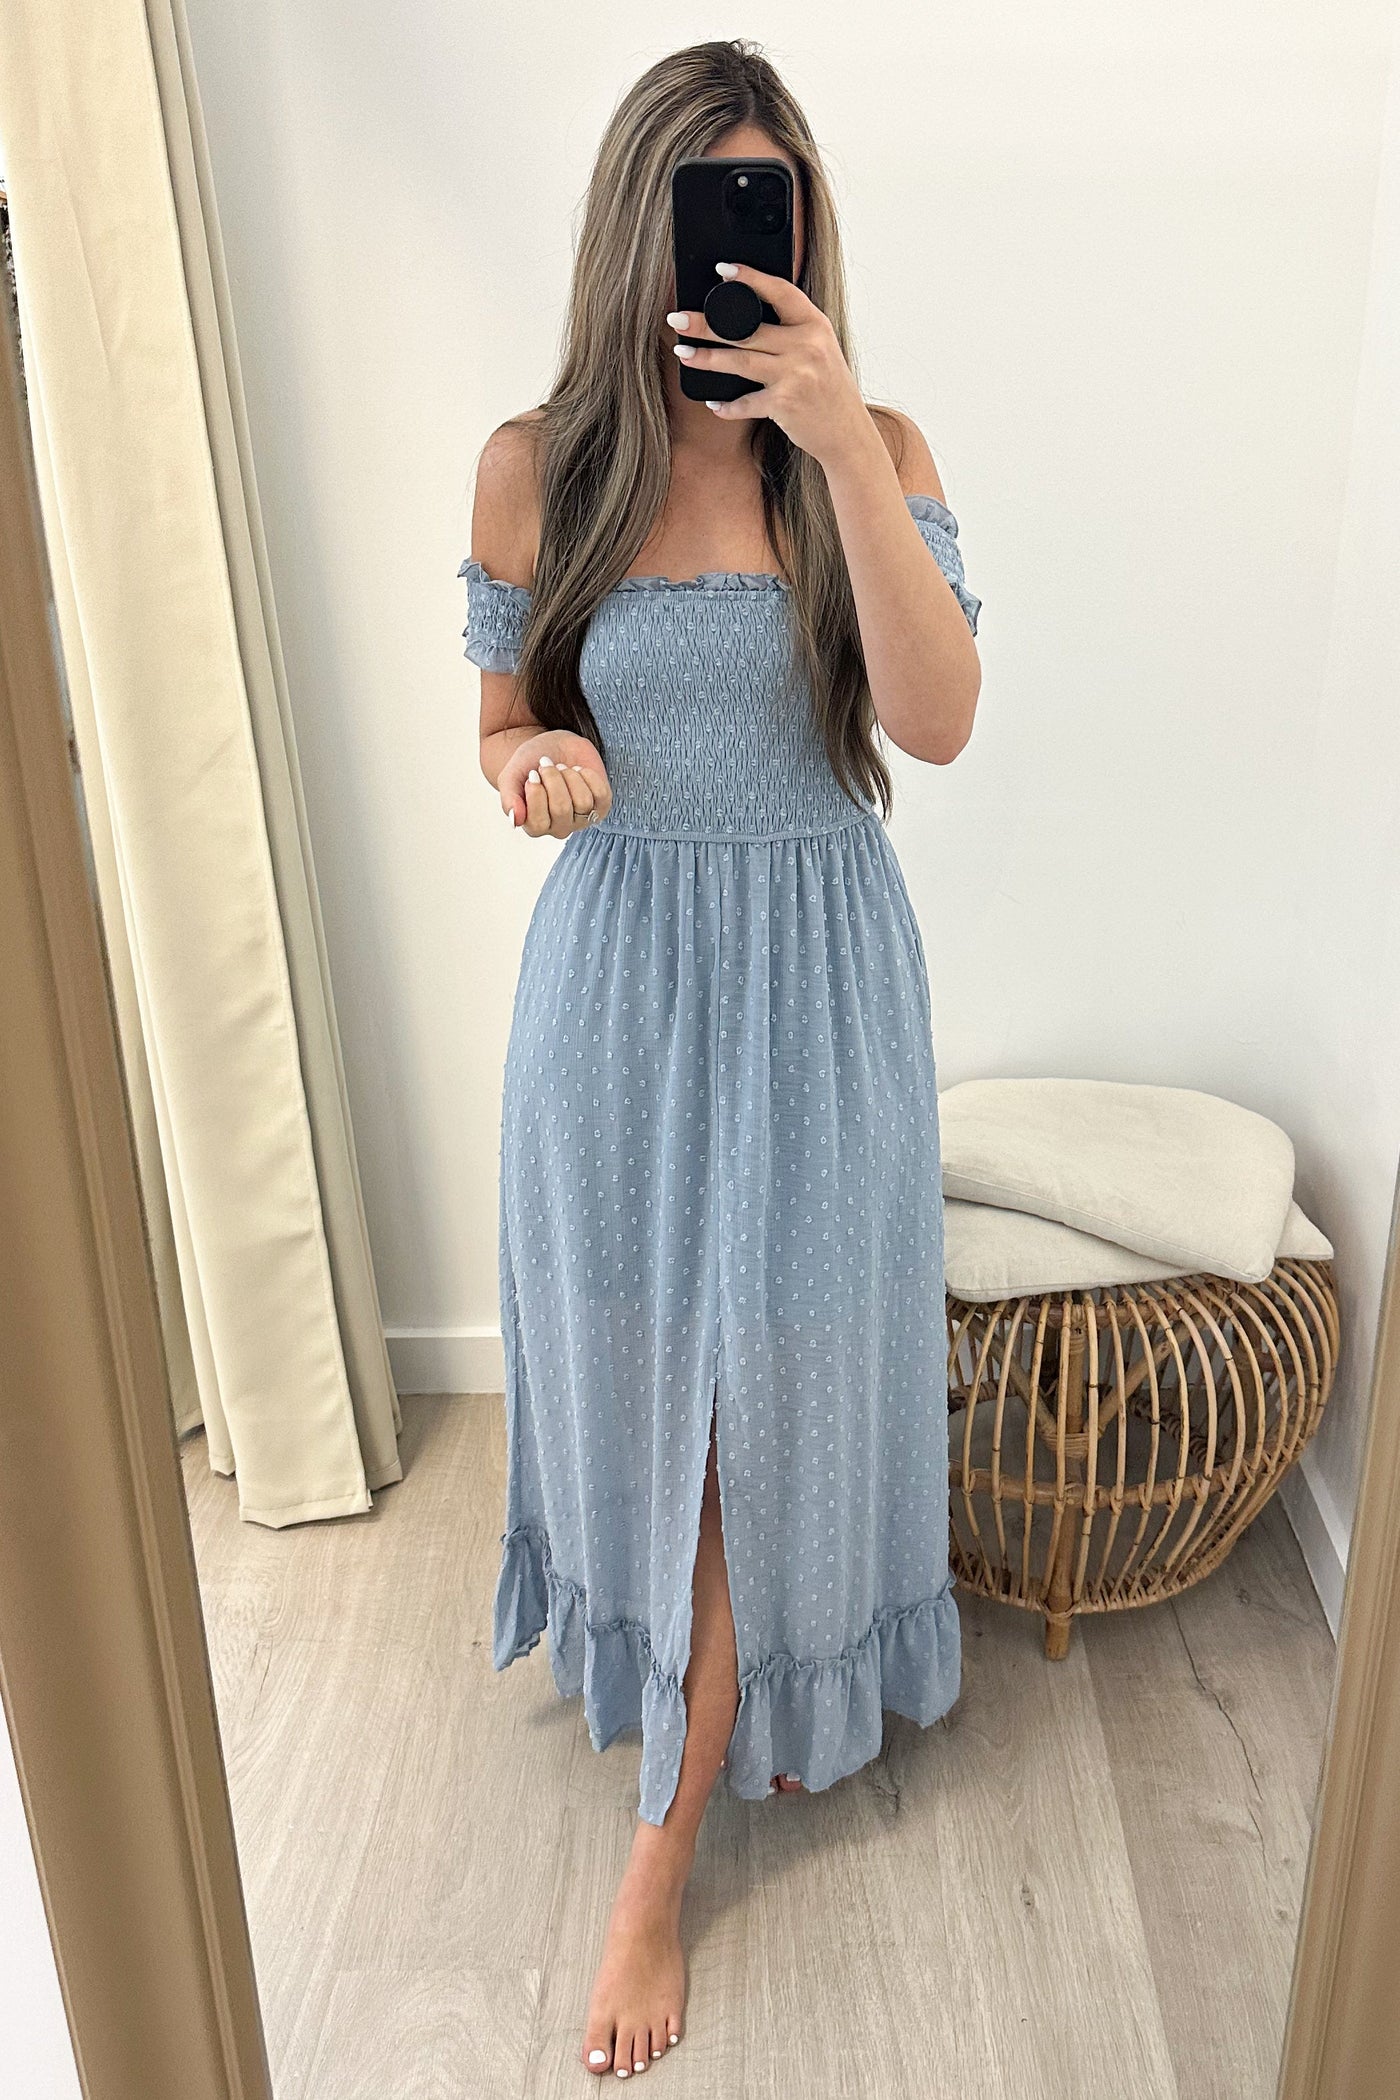 "Get With It" Dress (Misty Blue) - Happily Ever Aften